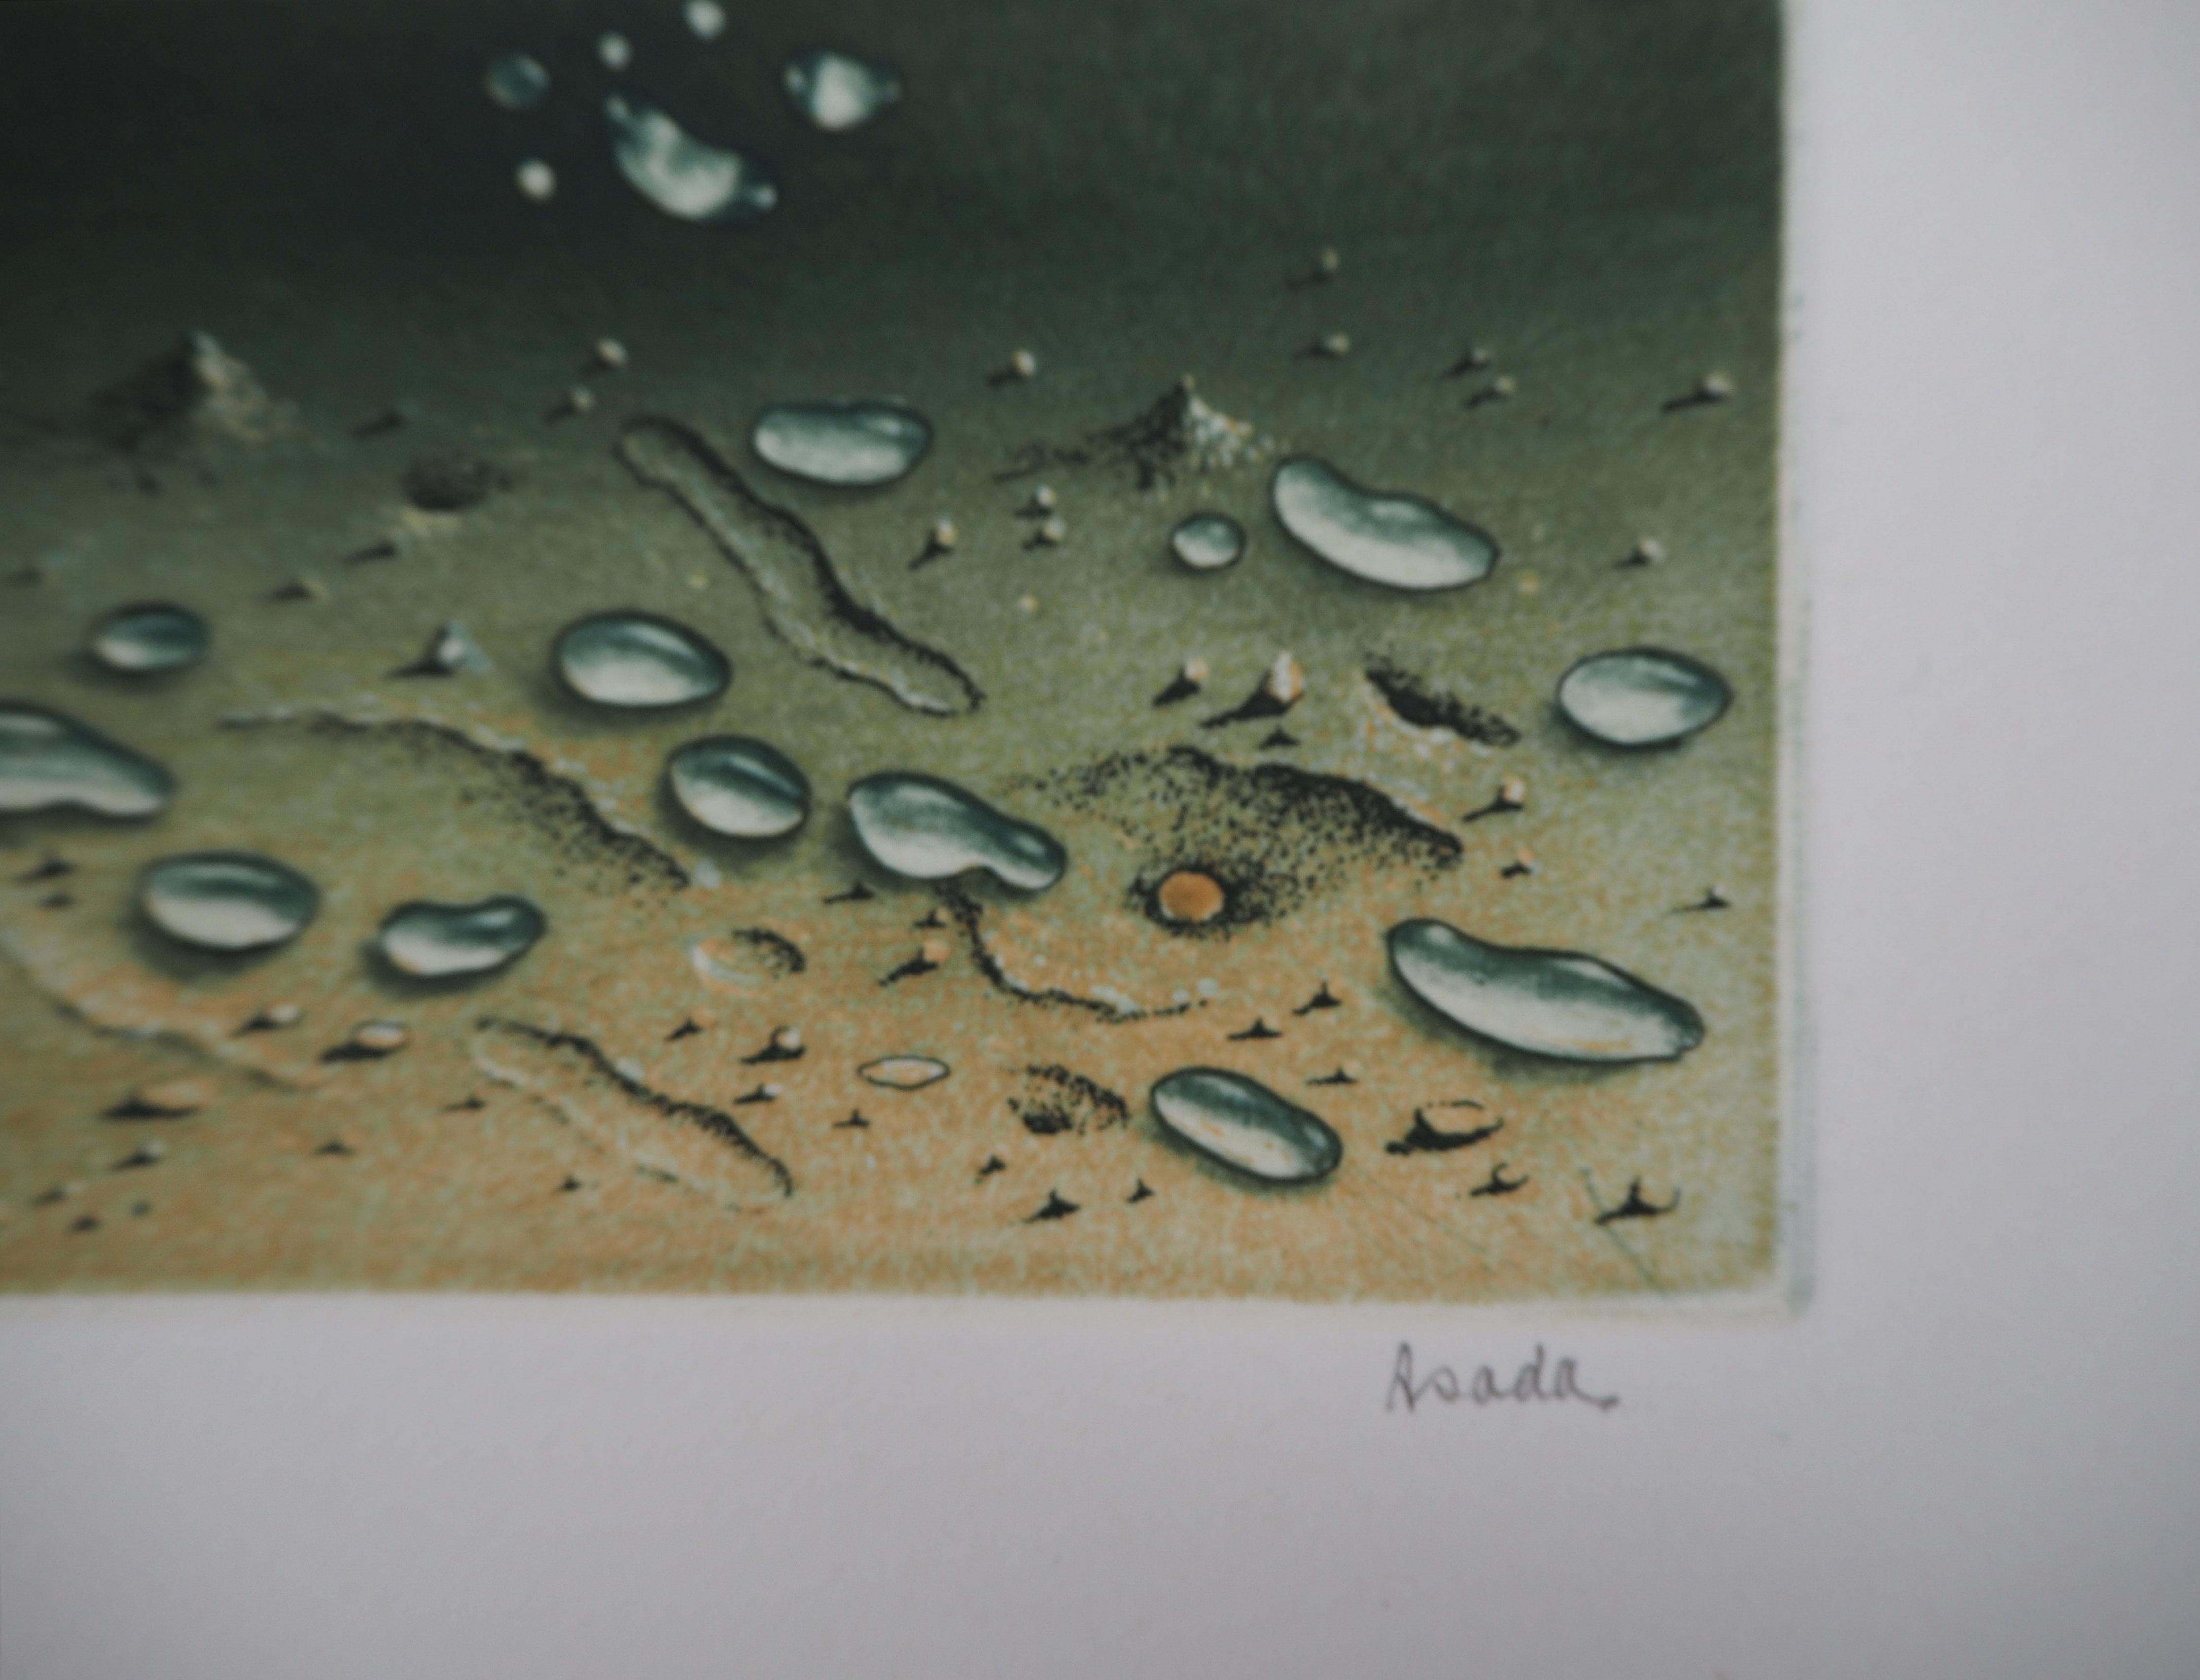 Zen : Water Drops on the Sand - Original handsigned etching - Numbered / 200 - Print by Hiroshi Asada